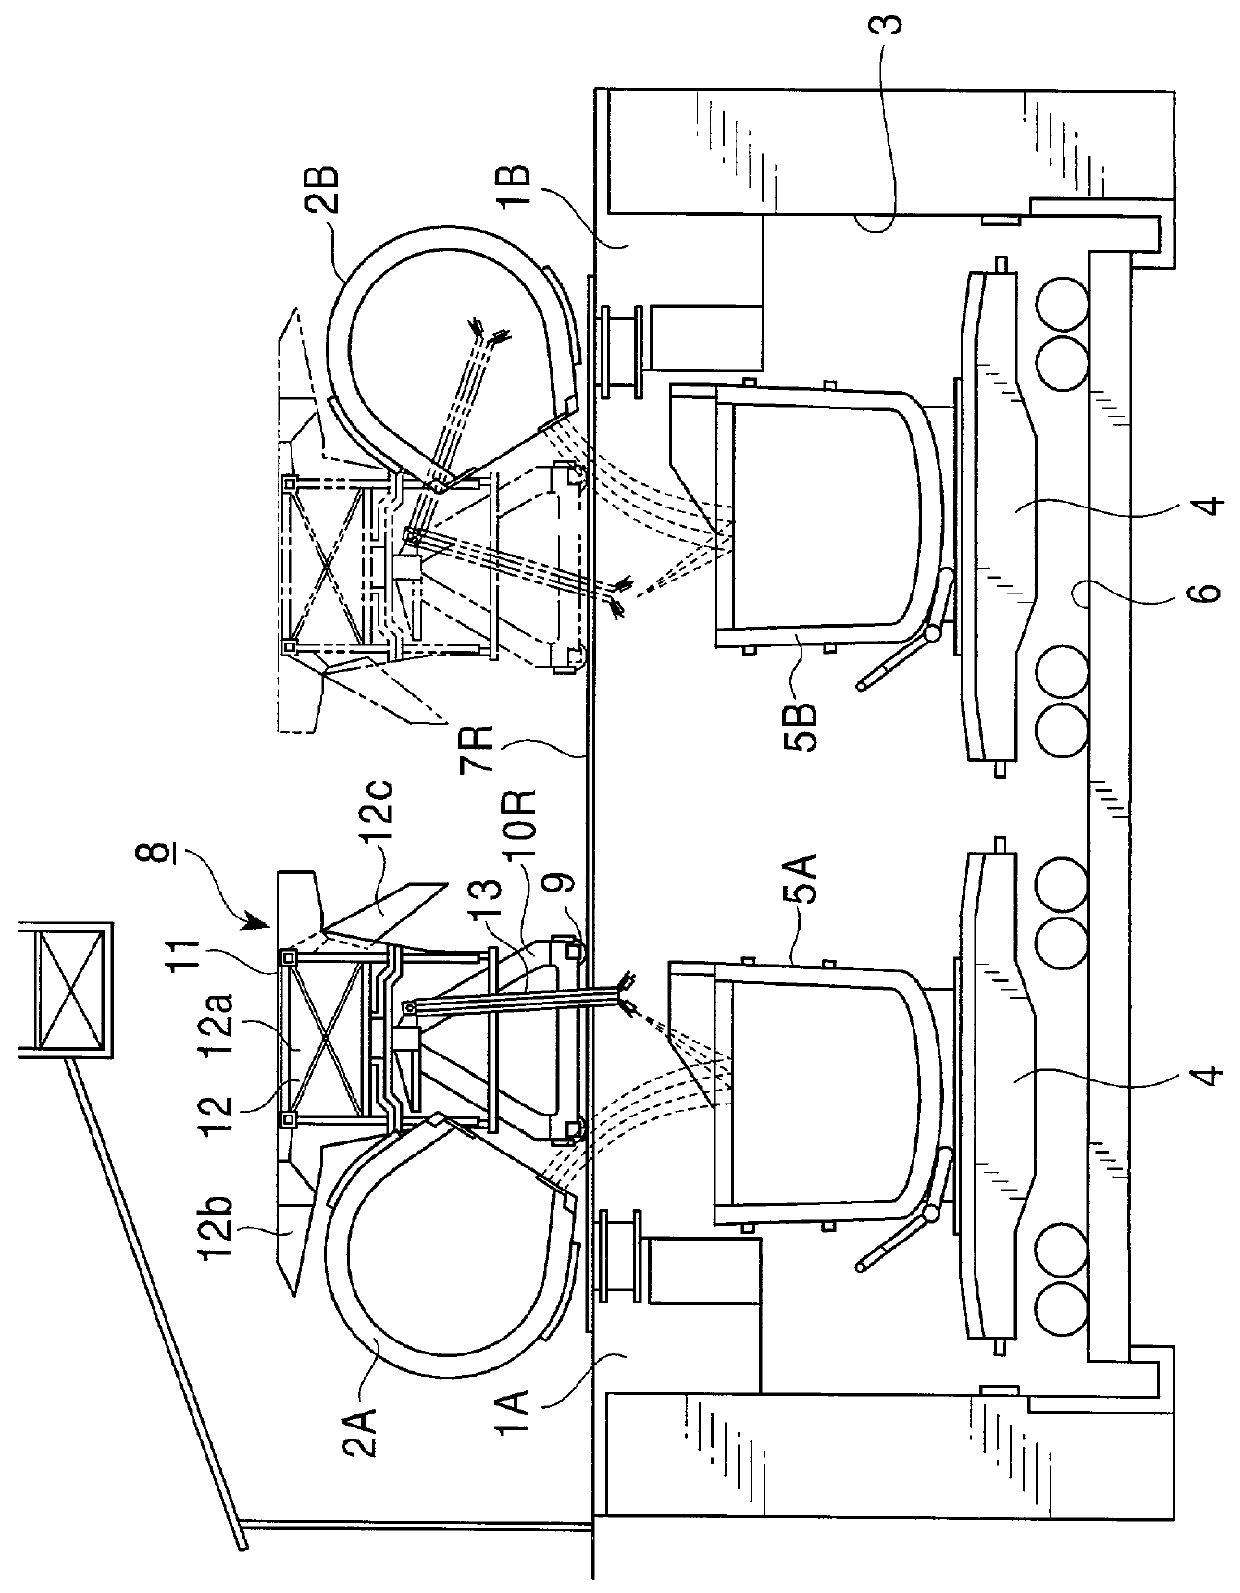 Fume dust suppression during pouring of molten metal, and apparatus